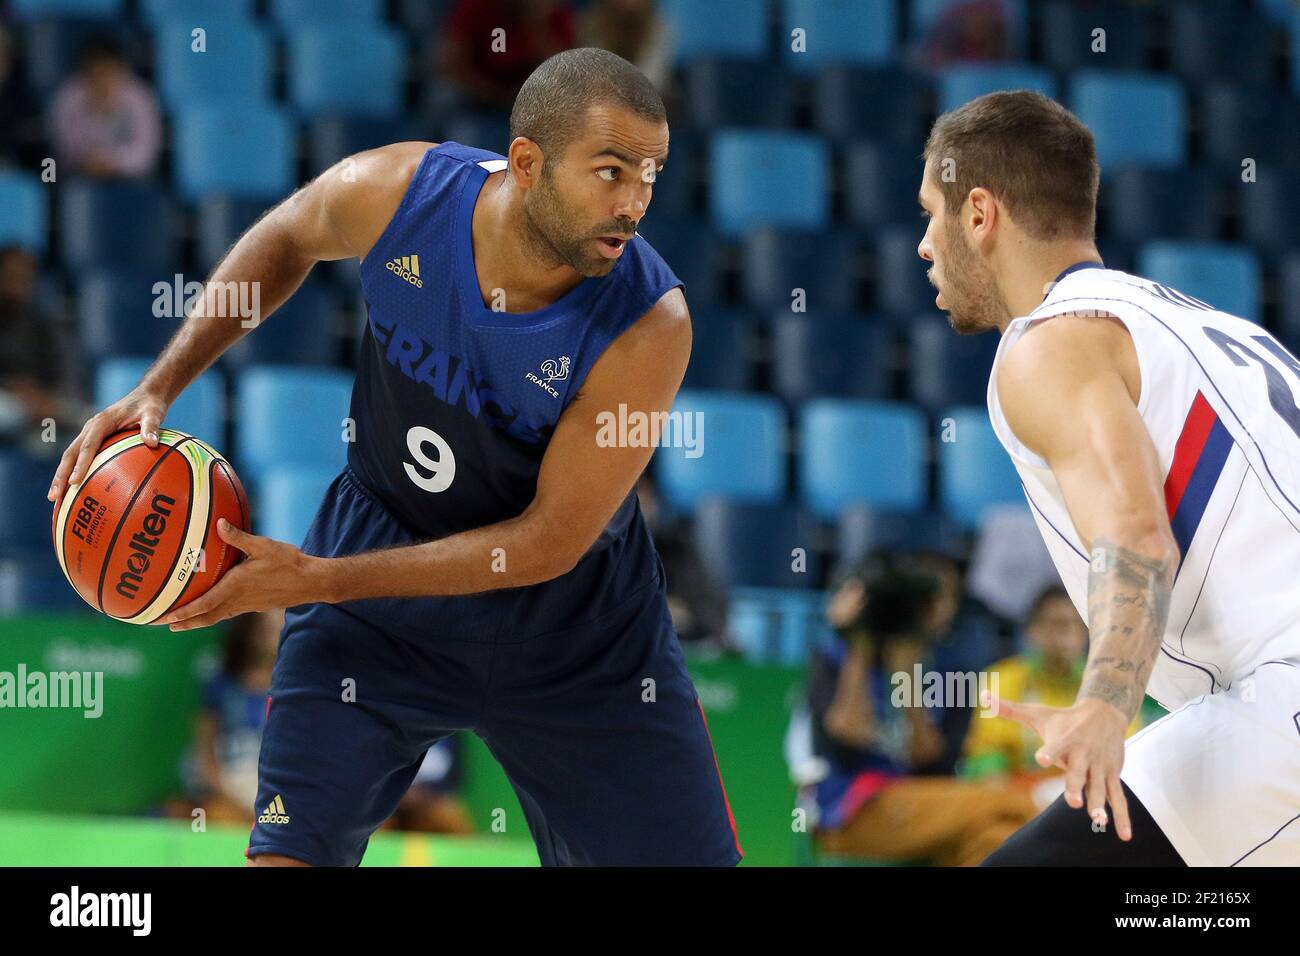 France s Tony Parker Basketball Men s in action against Stefan Jovic (SRB)  during the Olympic Games RIO 2016, Basketball Men, France v Serbia, on  August 10, 2016, in Rio, Brazil -